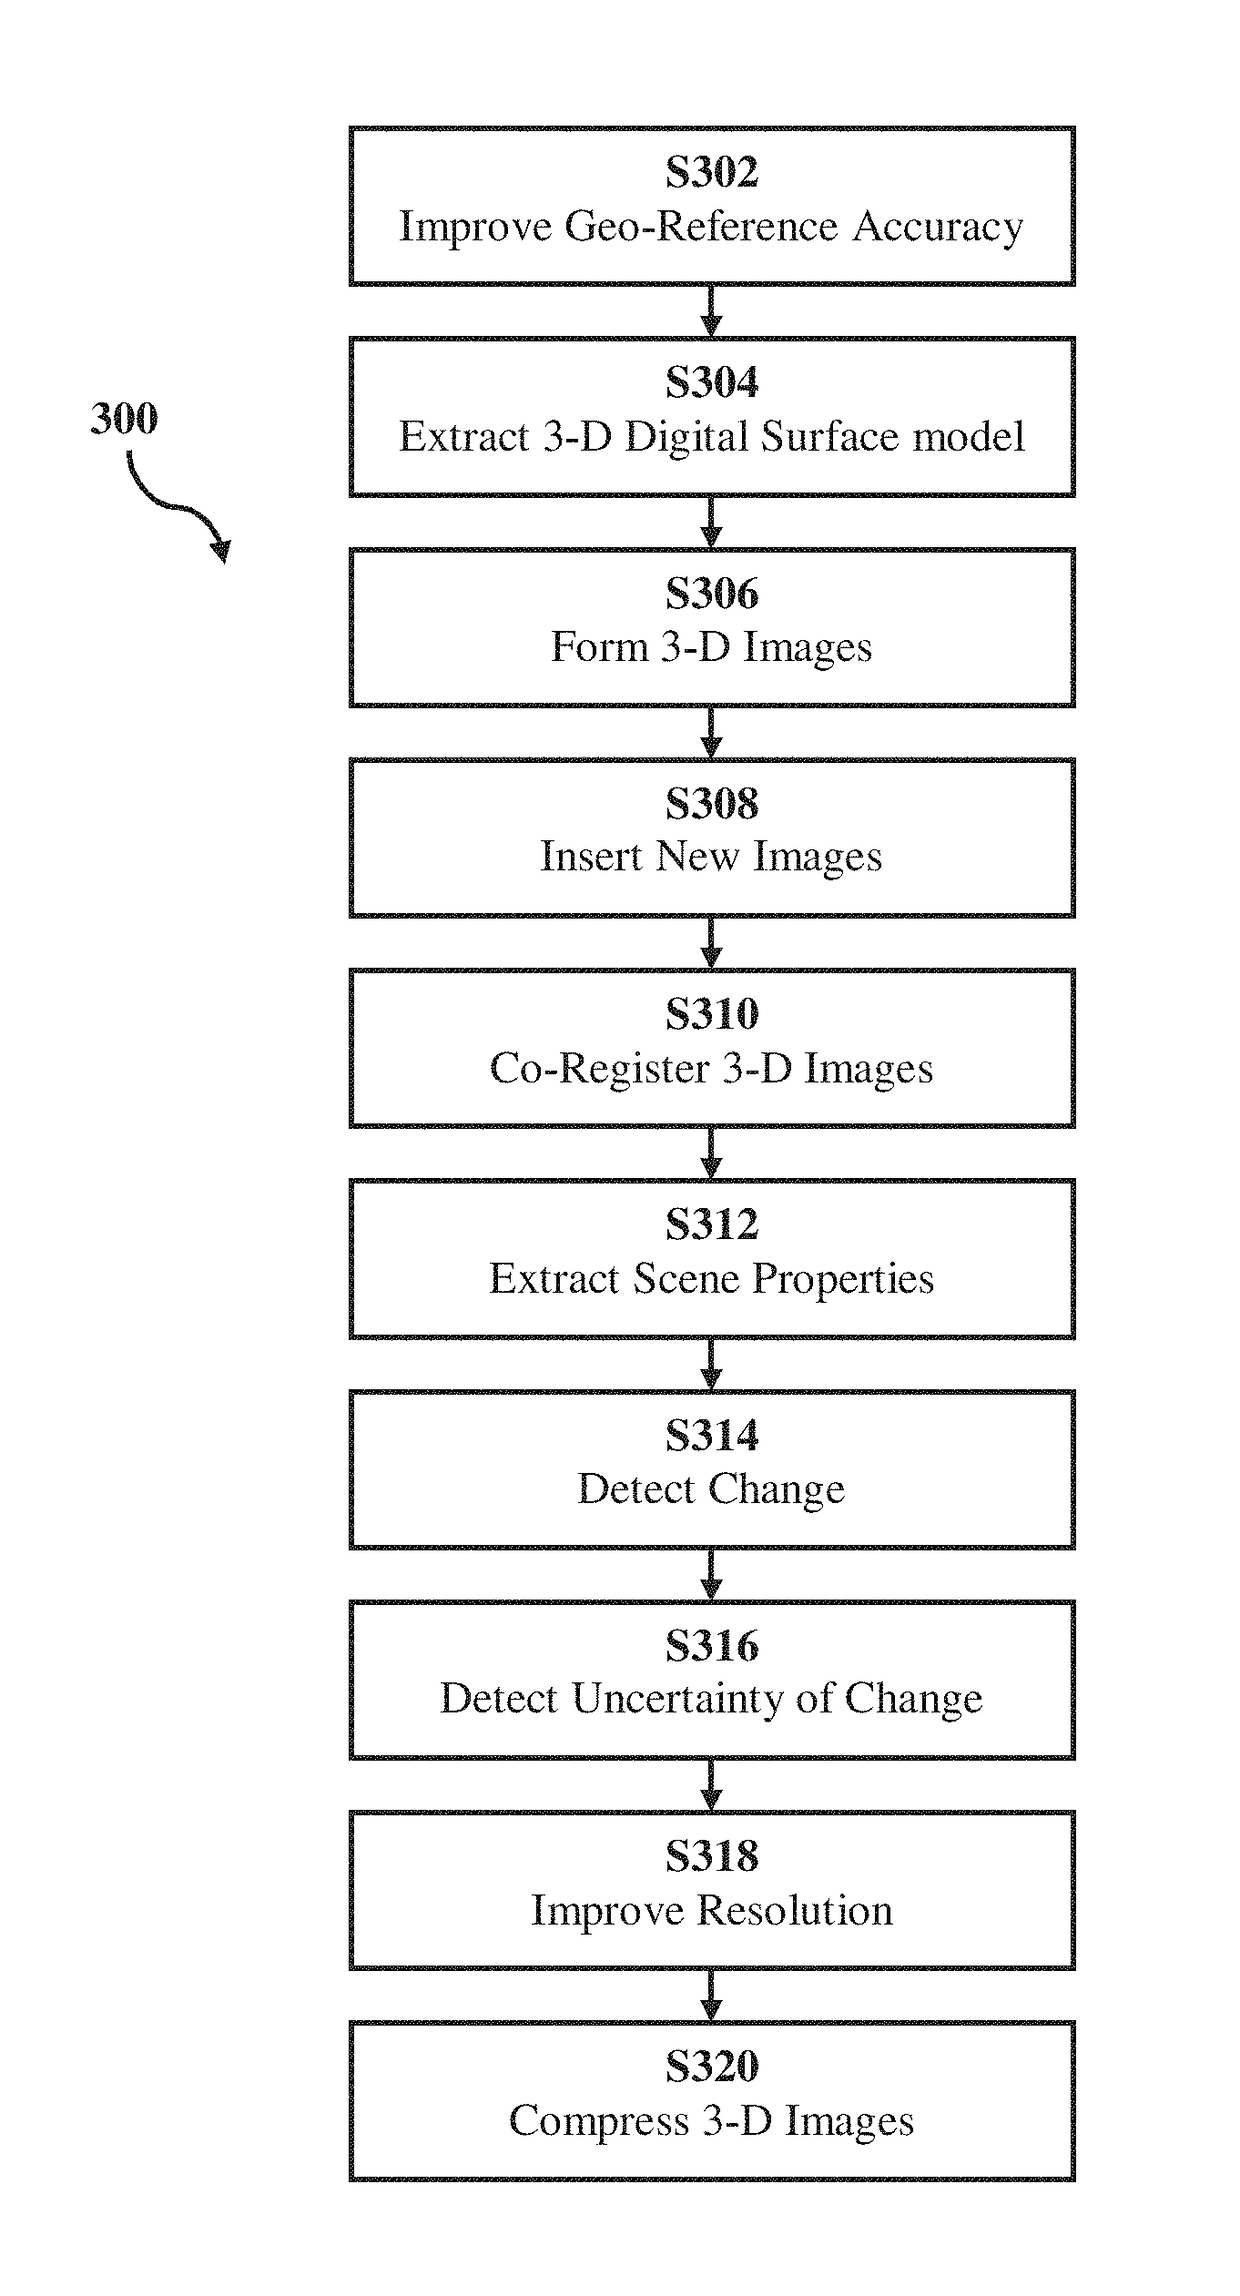 Methods for improving accuracy, analyzing change detection, and performing data compression for multiple images